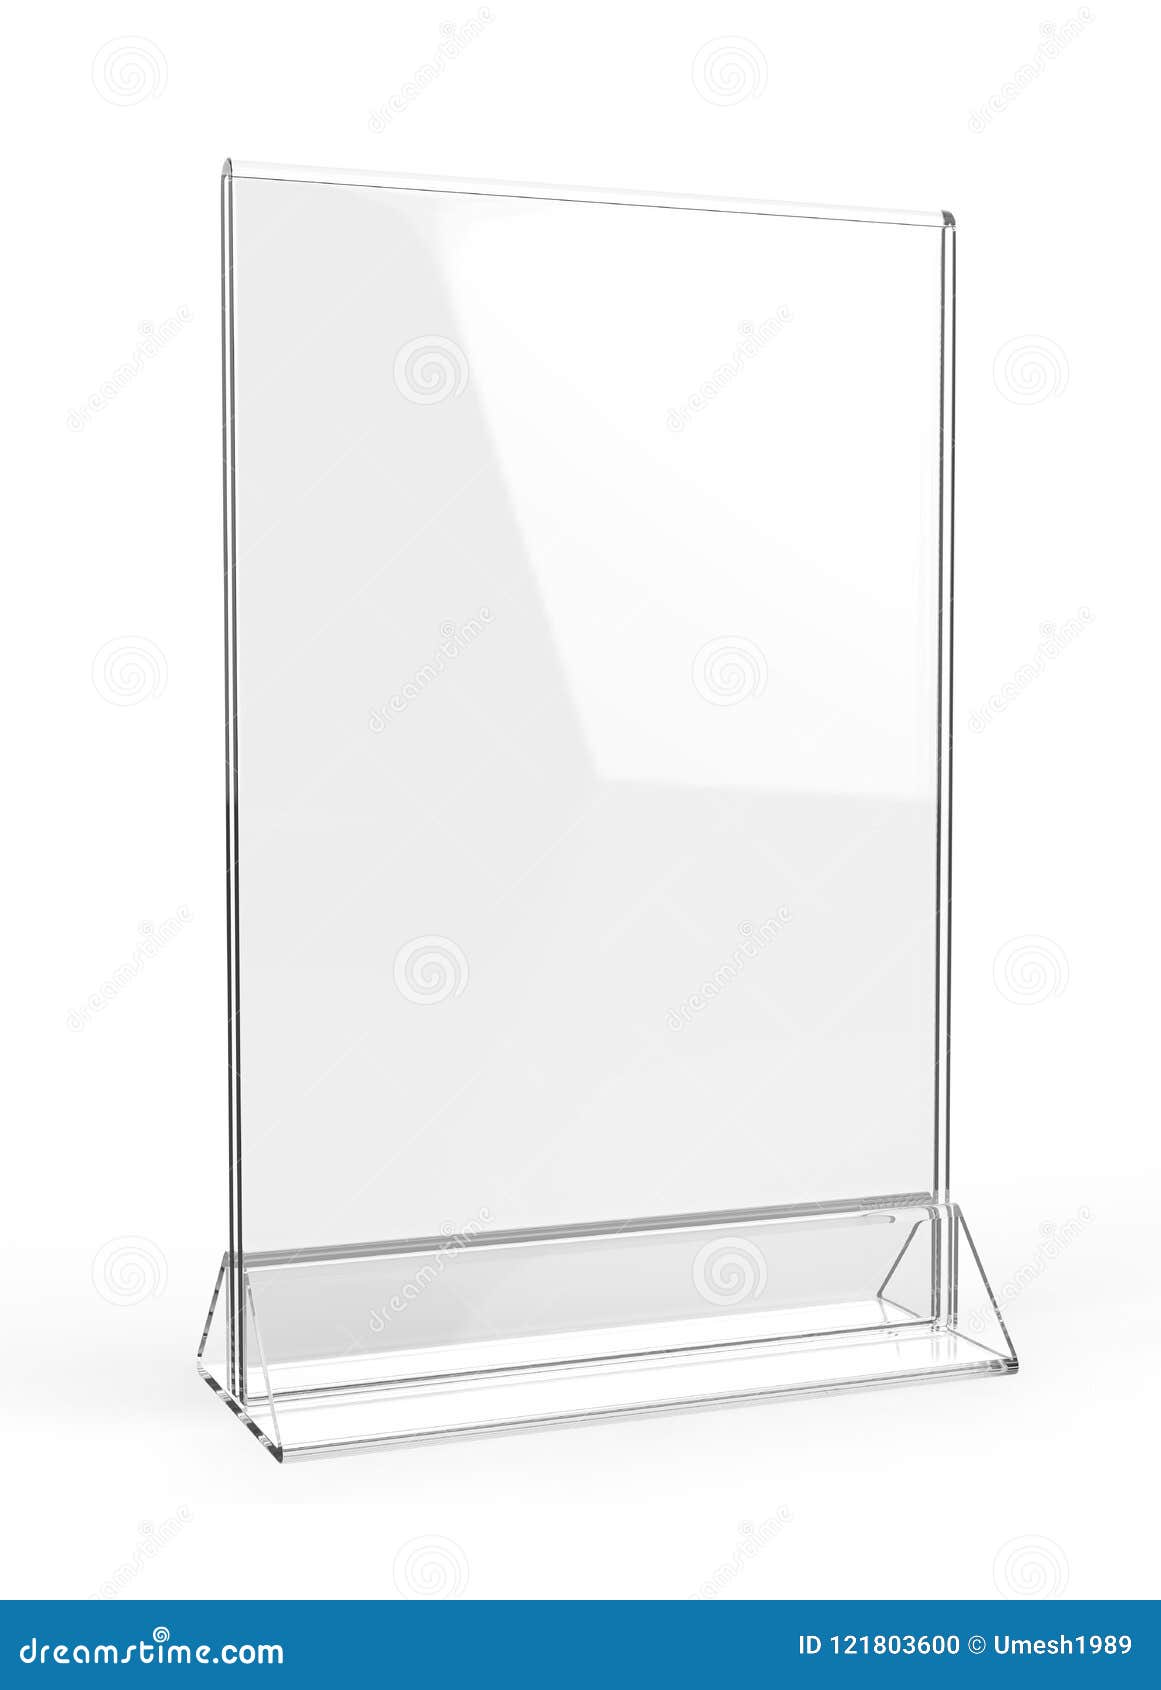 2 Piece Design For Flyer And Menu Holder 8.5 X 11 Acrylic Sign Holder Portrait Secure Padded Shipment Clear Plastic Plexi Glass Frames For Photos Stores Restaurant Schools Wedding Events 12 Pack